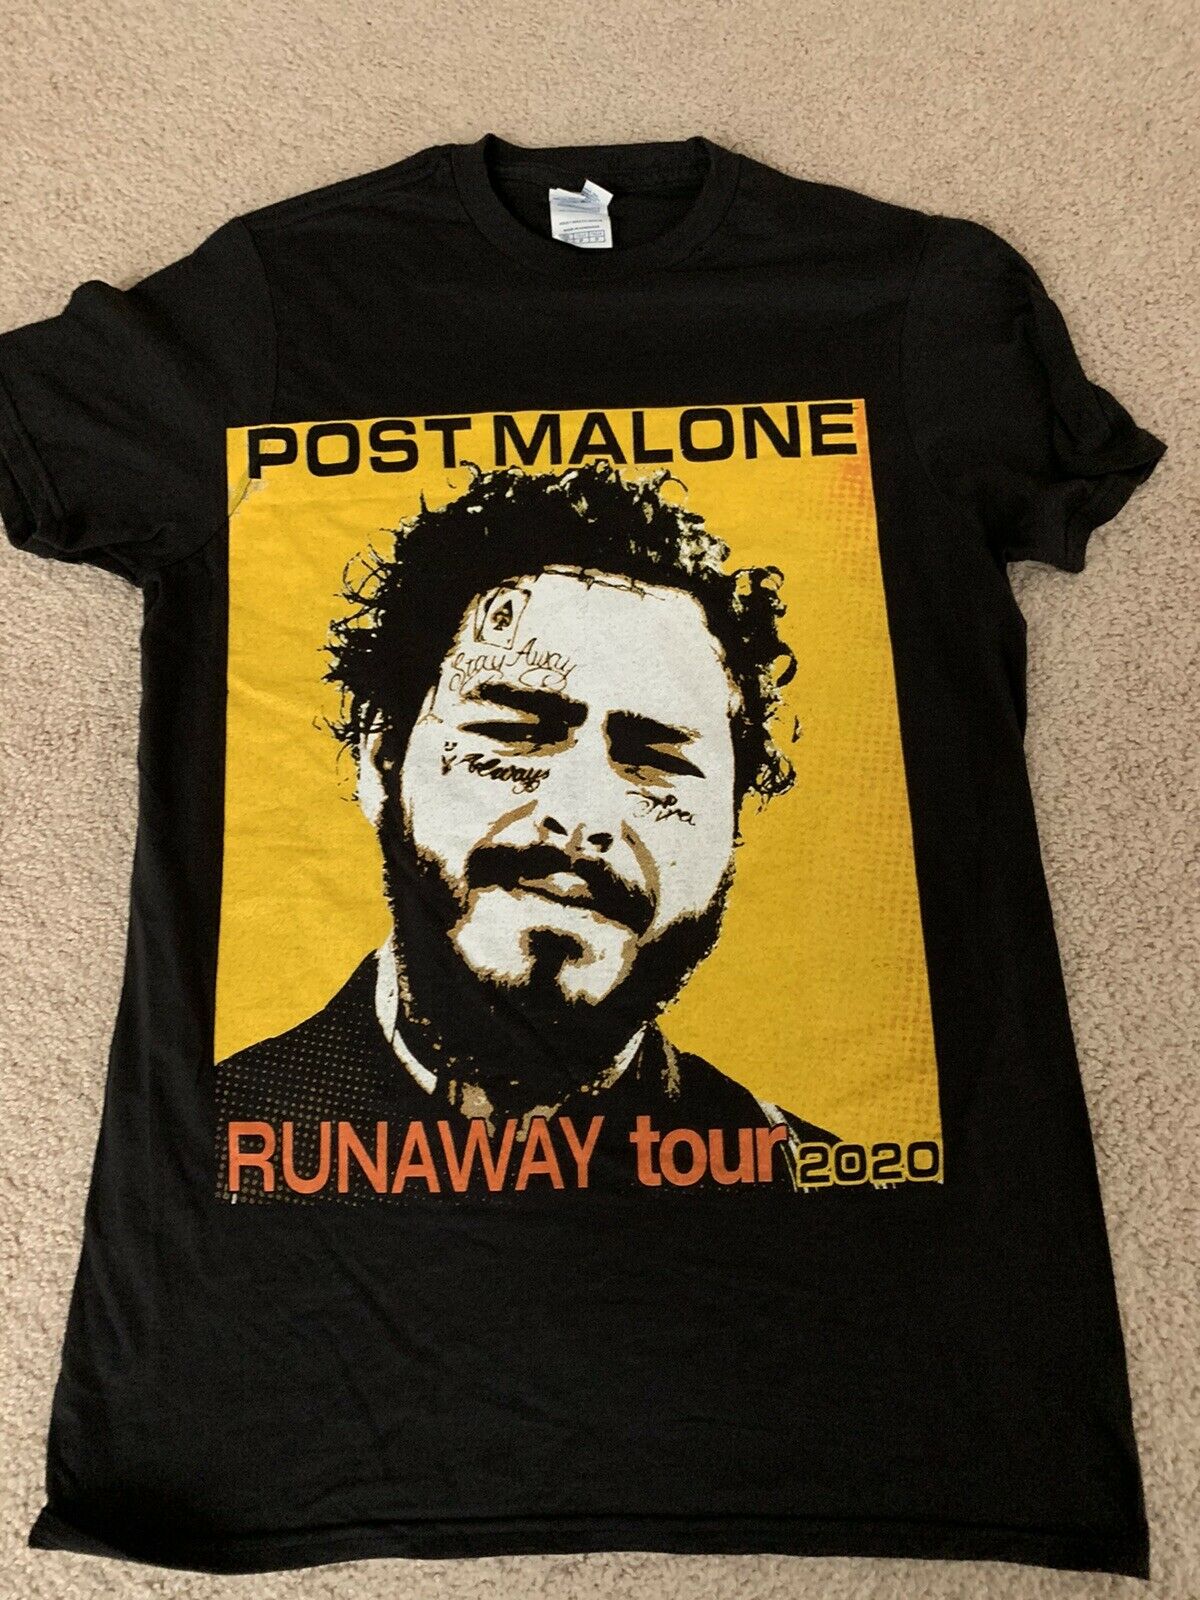 Post Malone Runaway Tour 2020 Concert T-shirt Black Double Sided Size Adult S